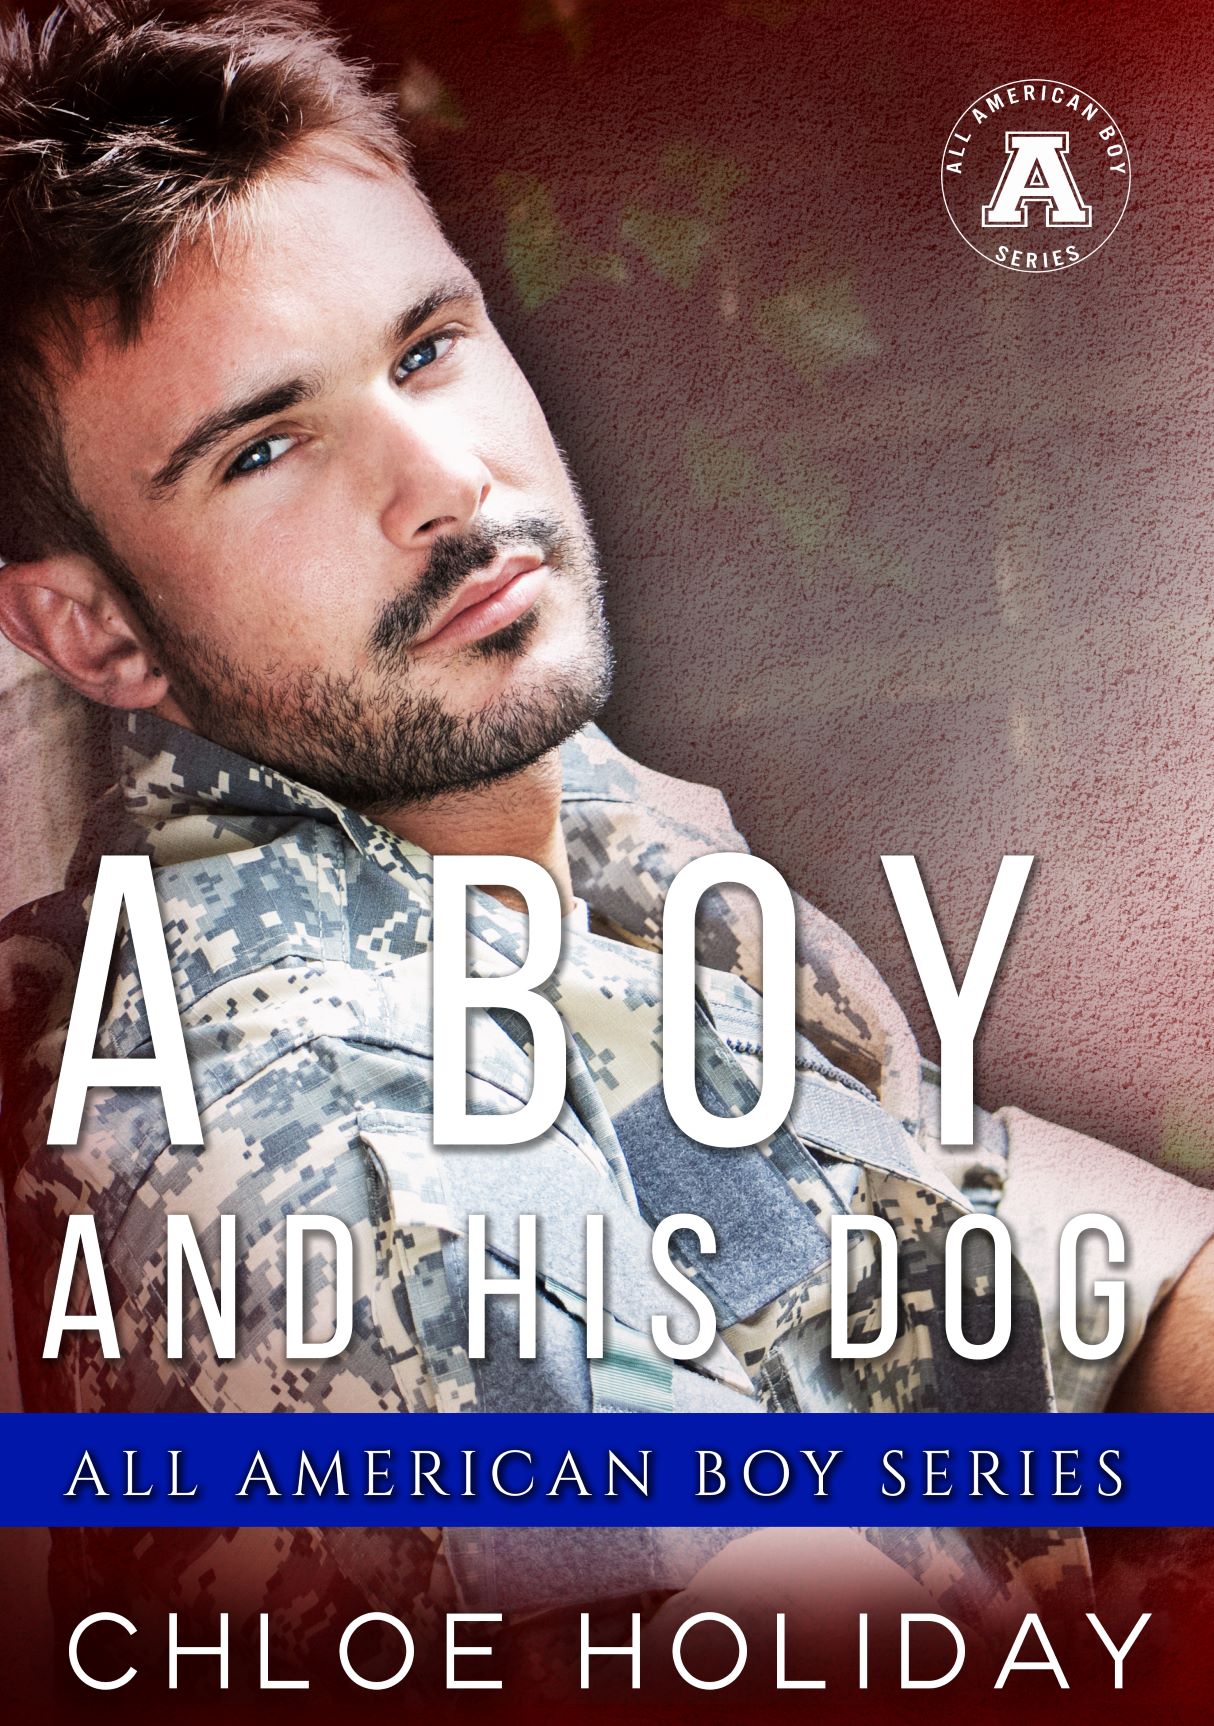 A Boy and his Dog by Chloe Holiday is available in paperback, e-book, and audiobook formats. A chance to win a copy tonight!